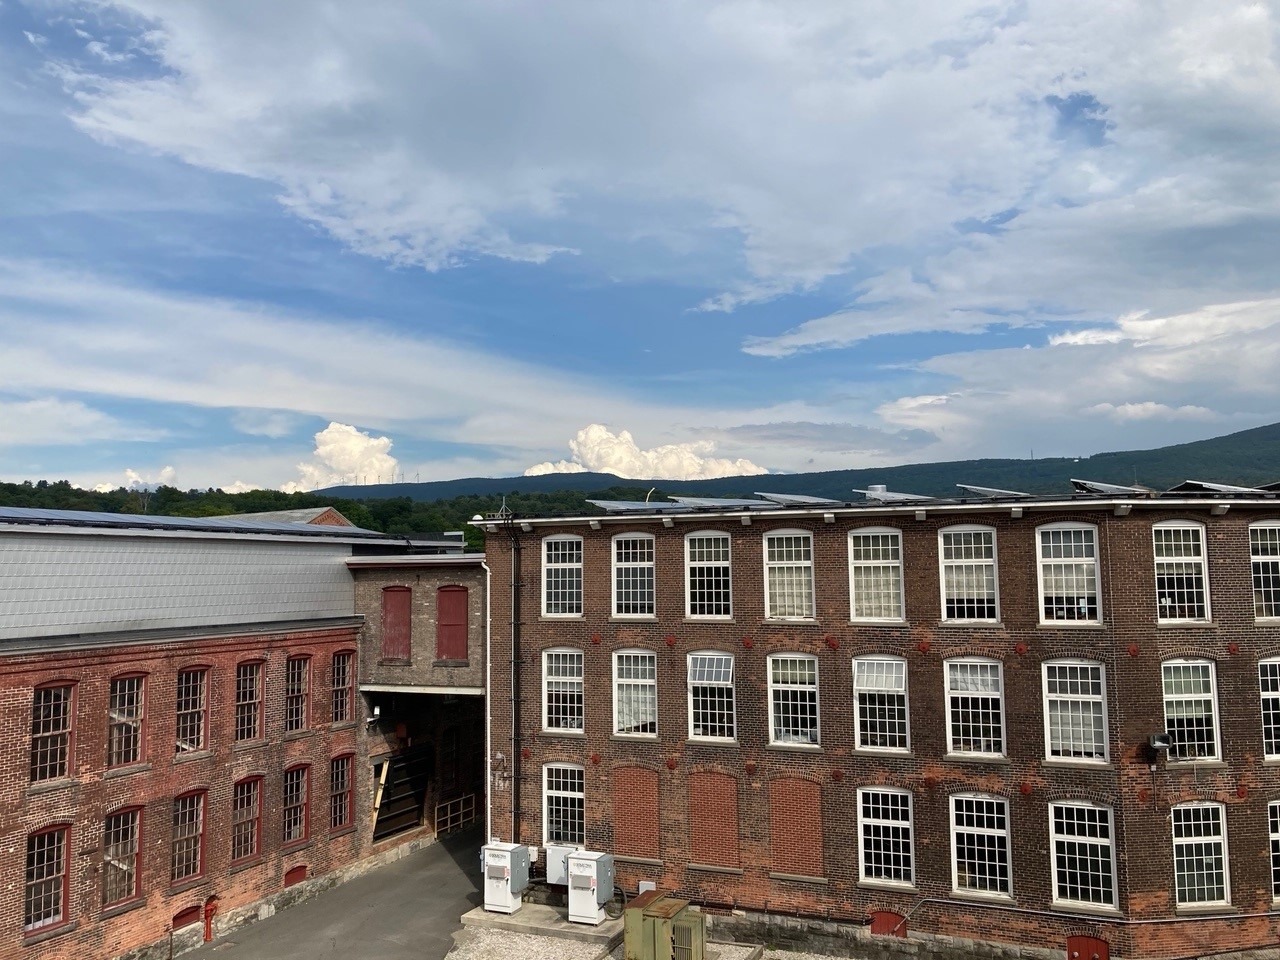 Photo of historic brick mill complex reused as an art museum. Solar panels are on the roof and along the mountain ridge in the distance, wind turbines are visible.